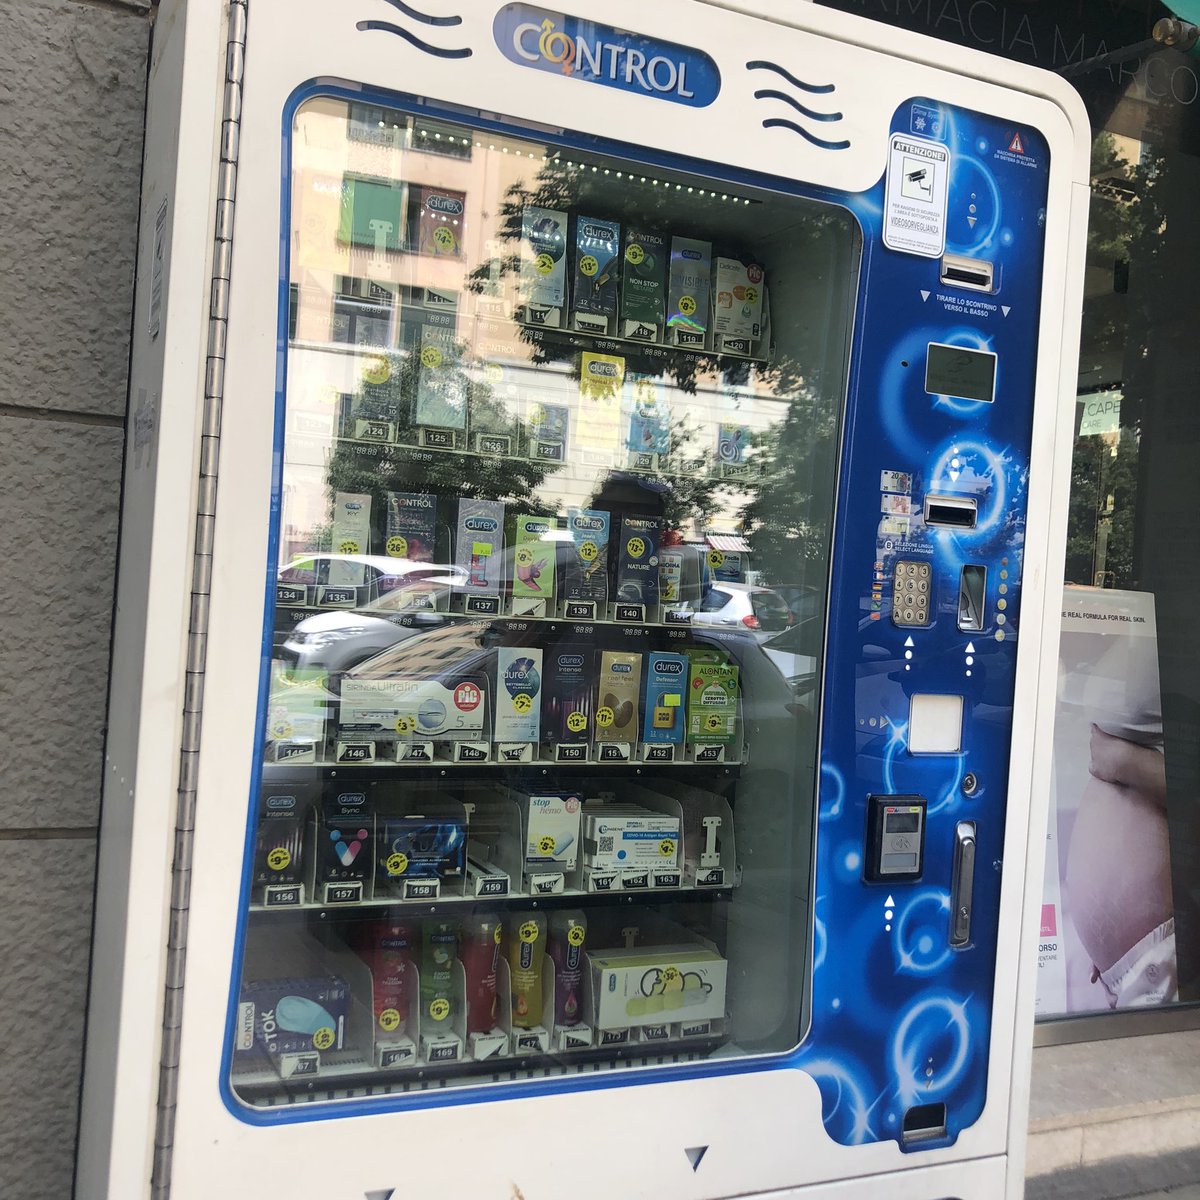 Just home from Rome and amazed at the condom vending machines throughout the city. 
Could this be why the teenage pregnancy rate is much, much lower than the UK. Contraception is normalised and visible. #healthvisiting @allypobb 
Ps. Photos of Romes famous ruins also taken 🤣